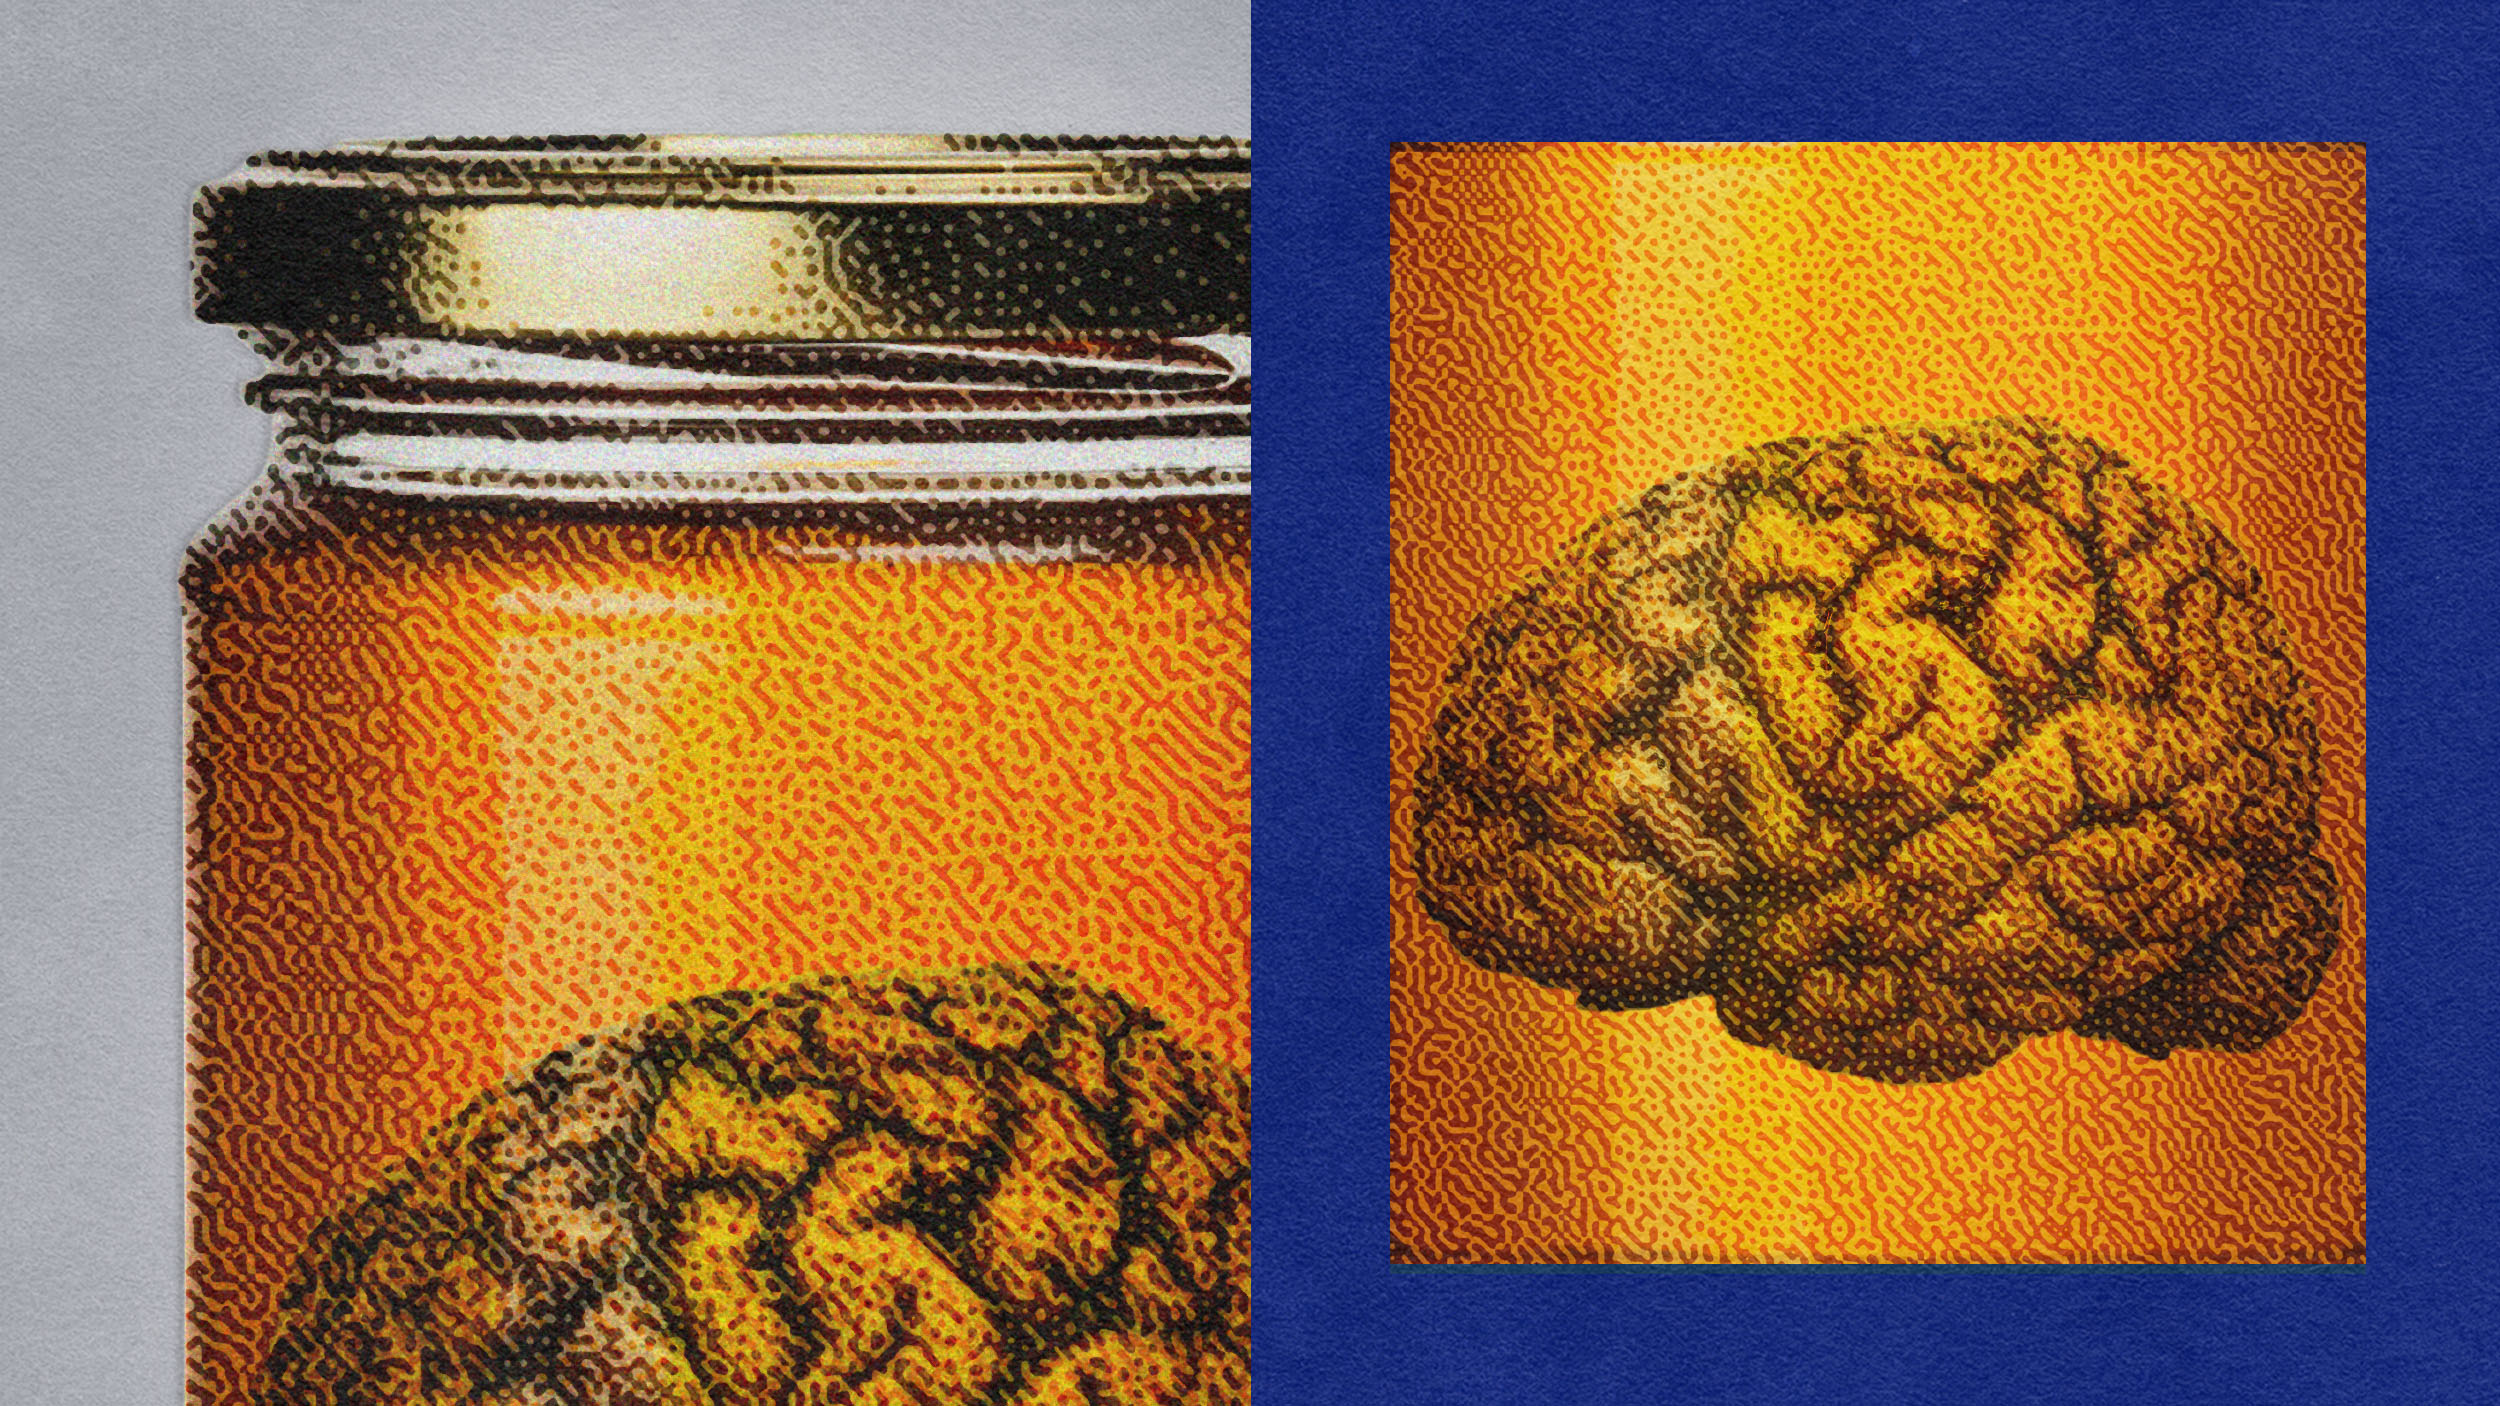 An image of a glass jar containing a brain on a textured background.